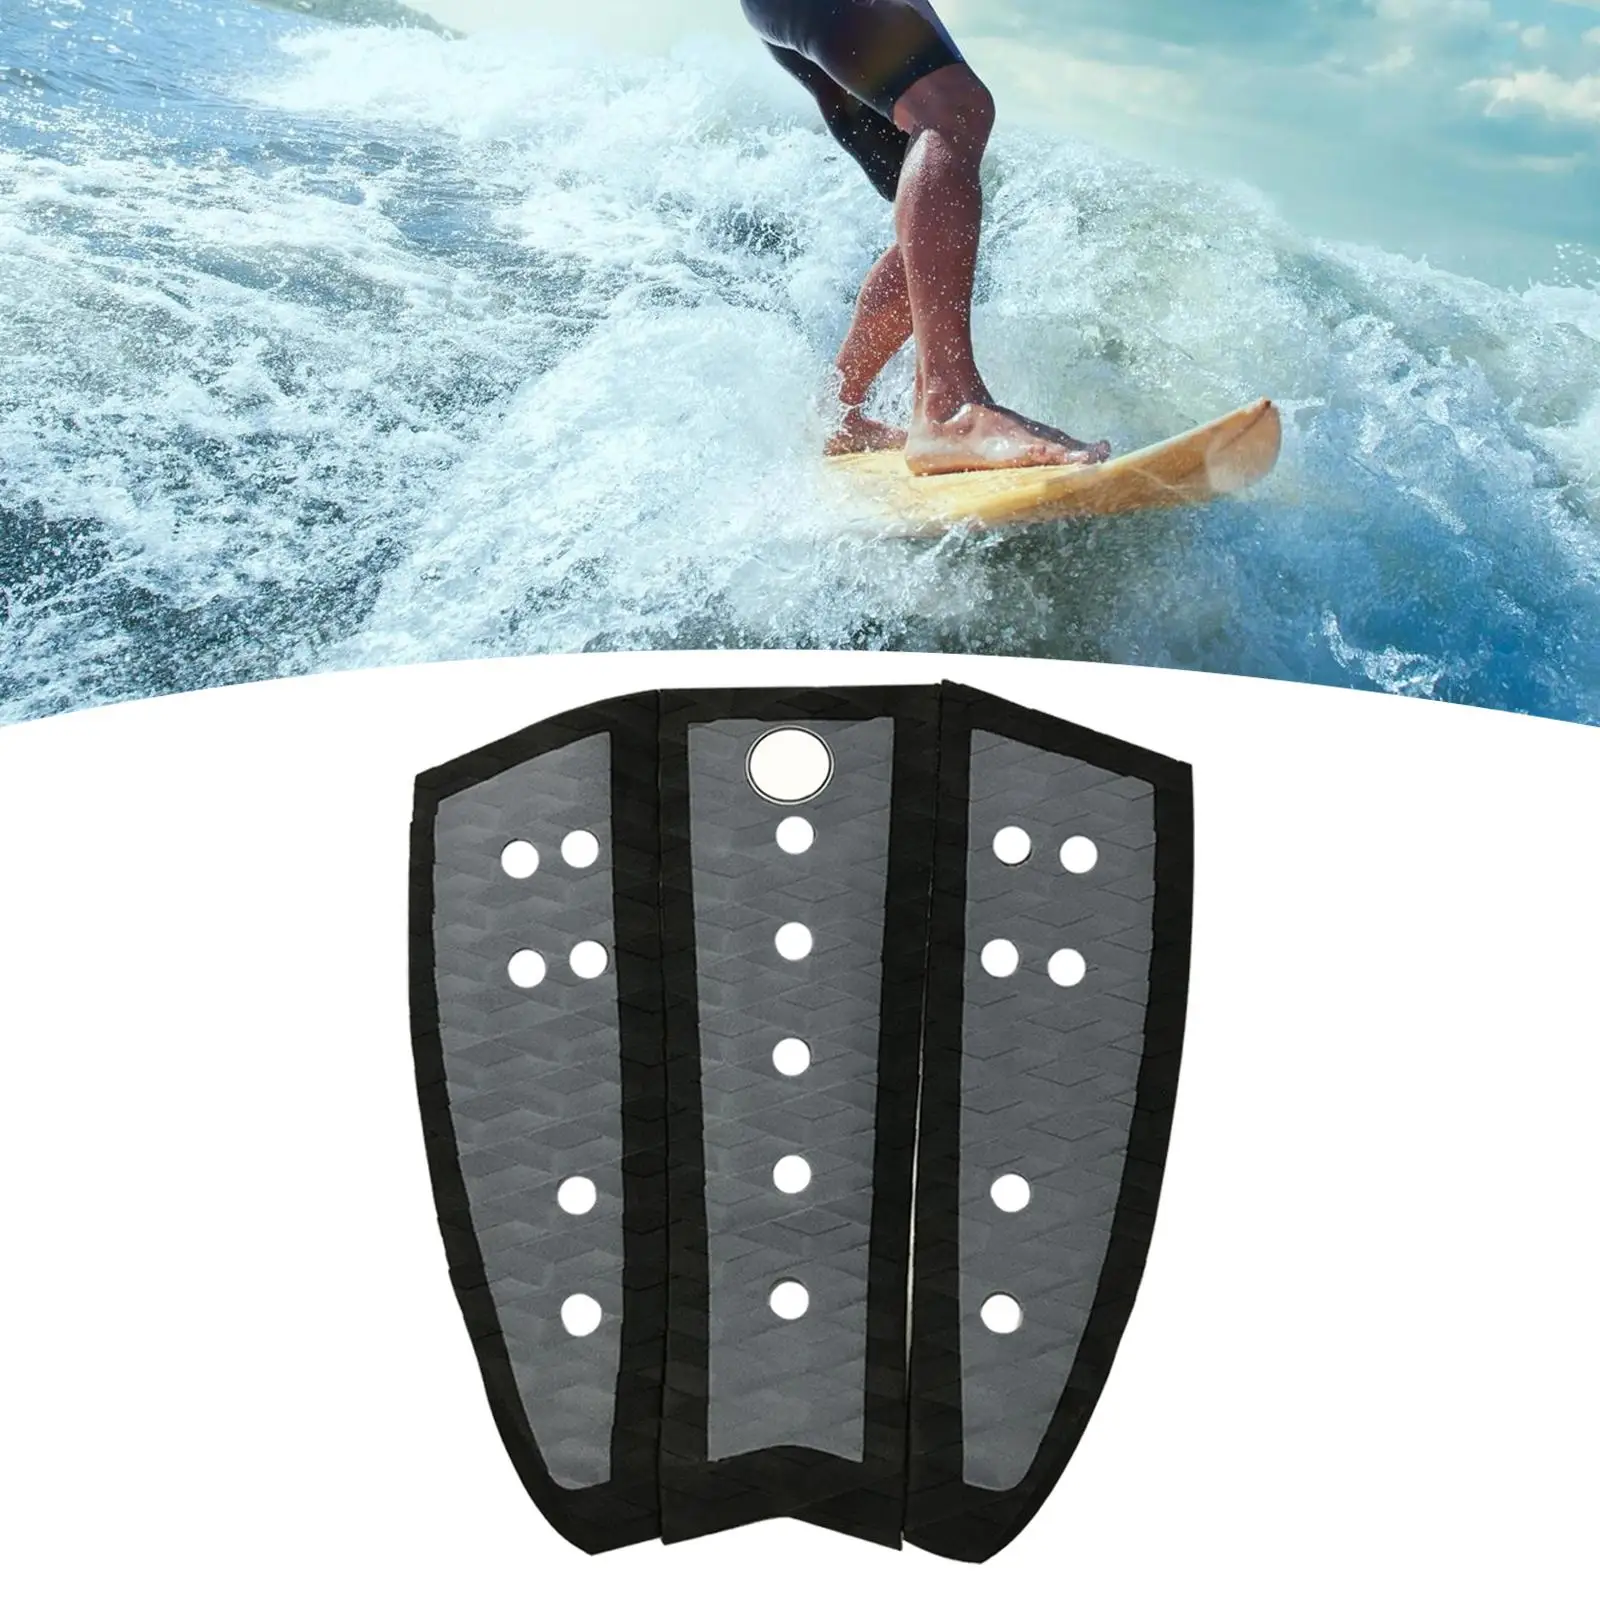 3Pcs Lightweight Surfboard Traction Pad Surfing Padding Deck Pad Grip Premium Tail Pad for Funboard Paddle Board Skimboards